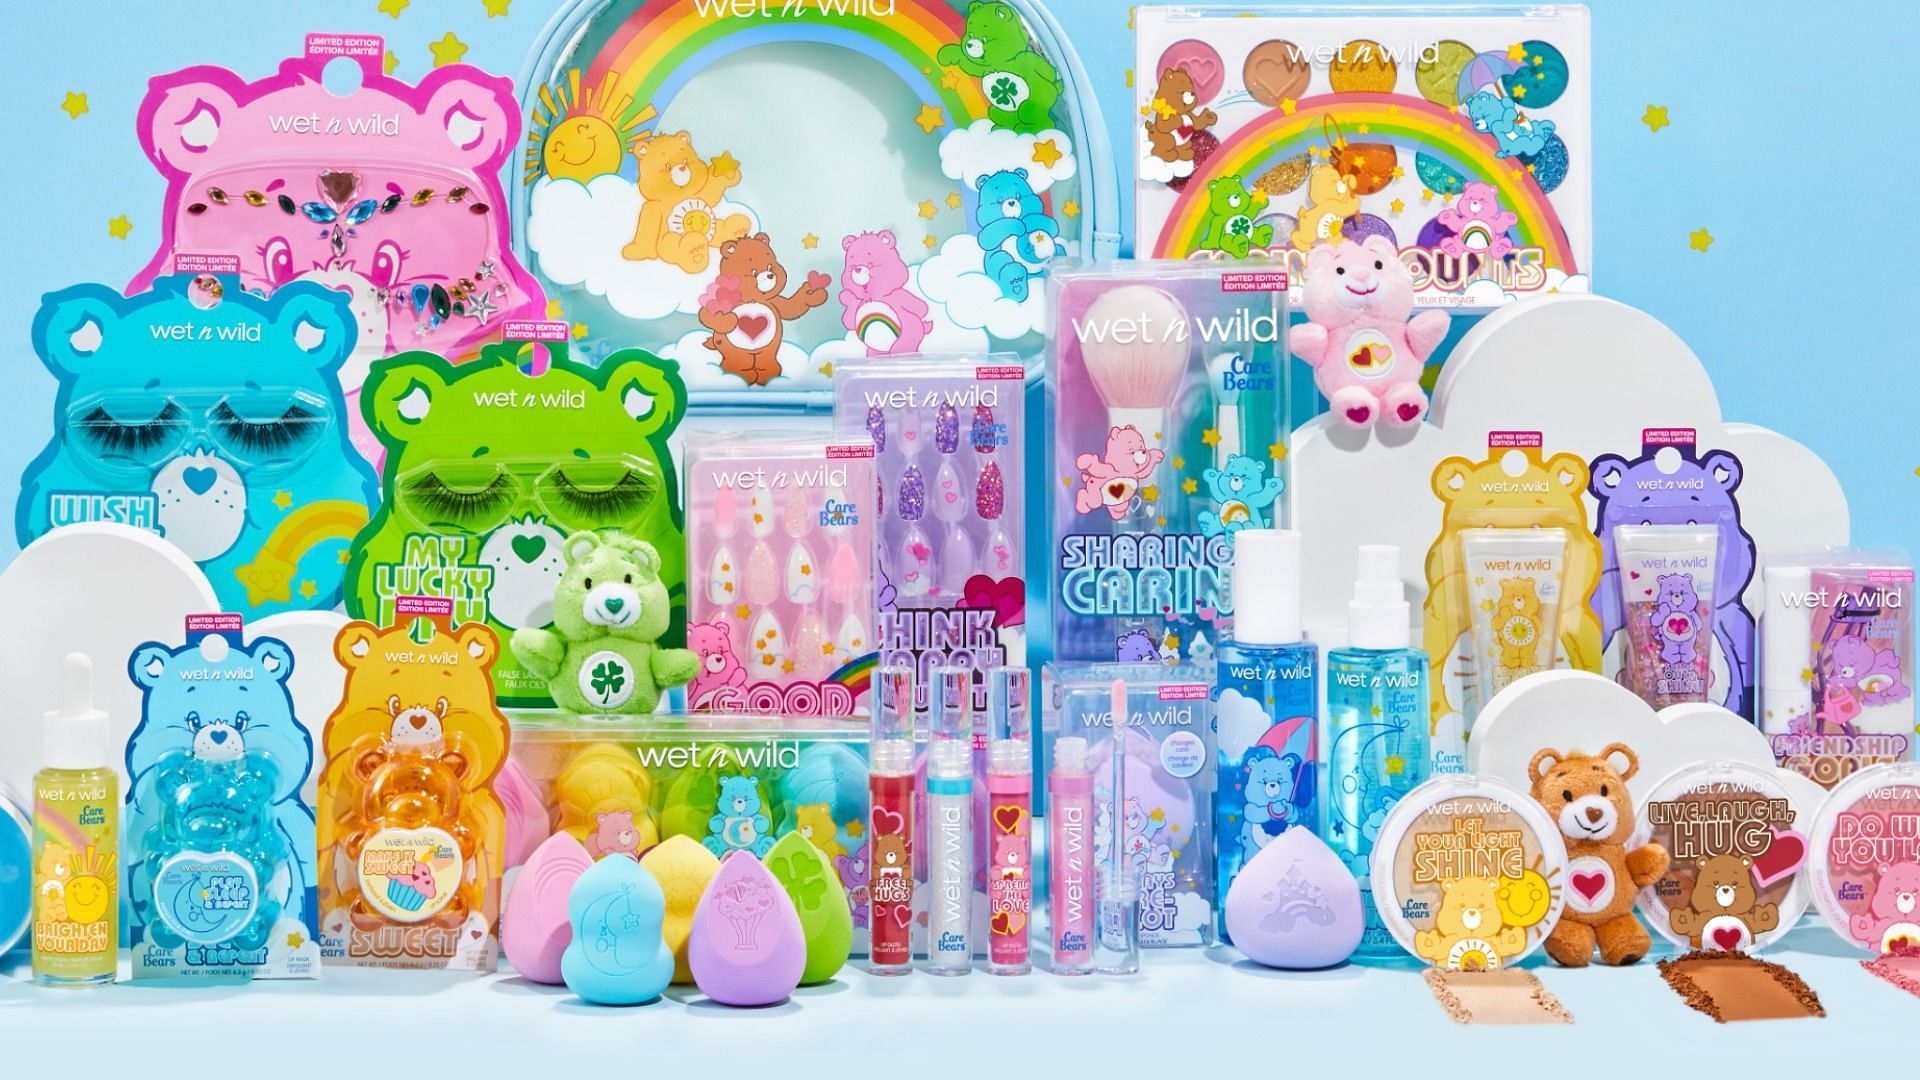 The Wet n Wild x Care Bears limited-edition collaboration celebrates 40th Care Bears anniversary (Image via Wet n Wild)